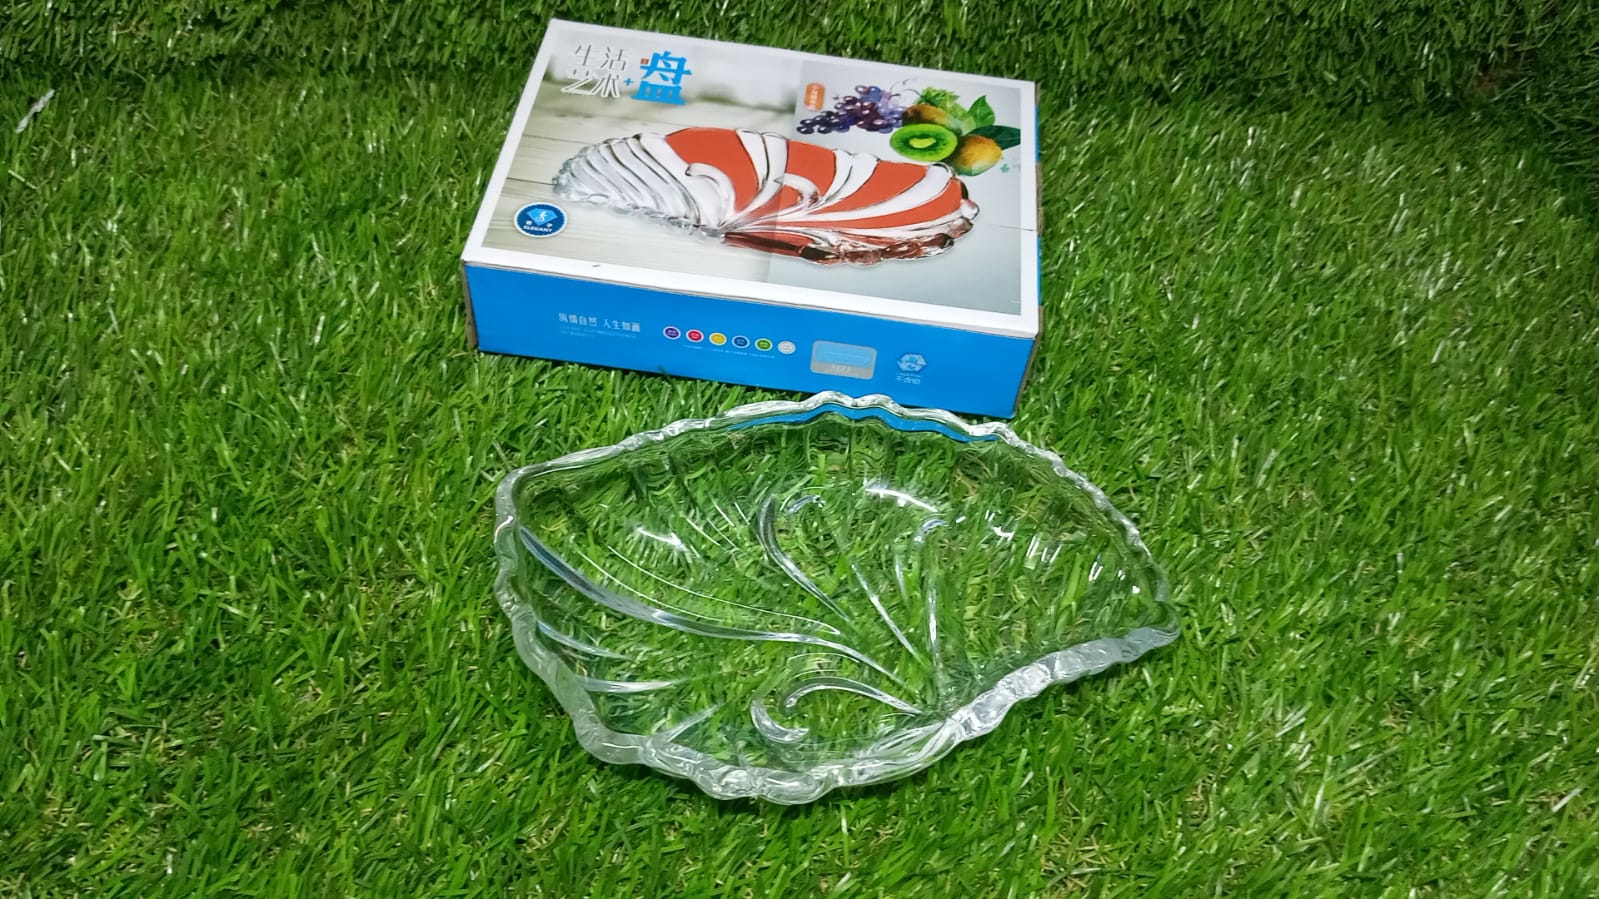 2354 Leaf shaped Glass Serve tray of snacks, Mukhwaas, and ice cream. DeoDap